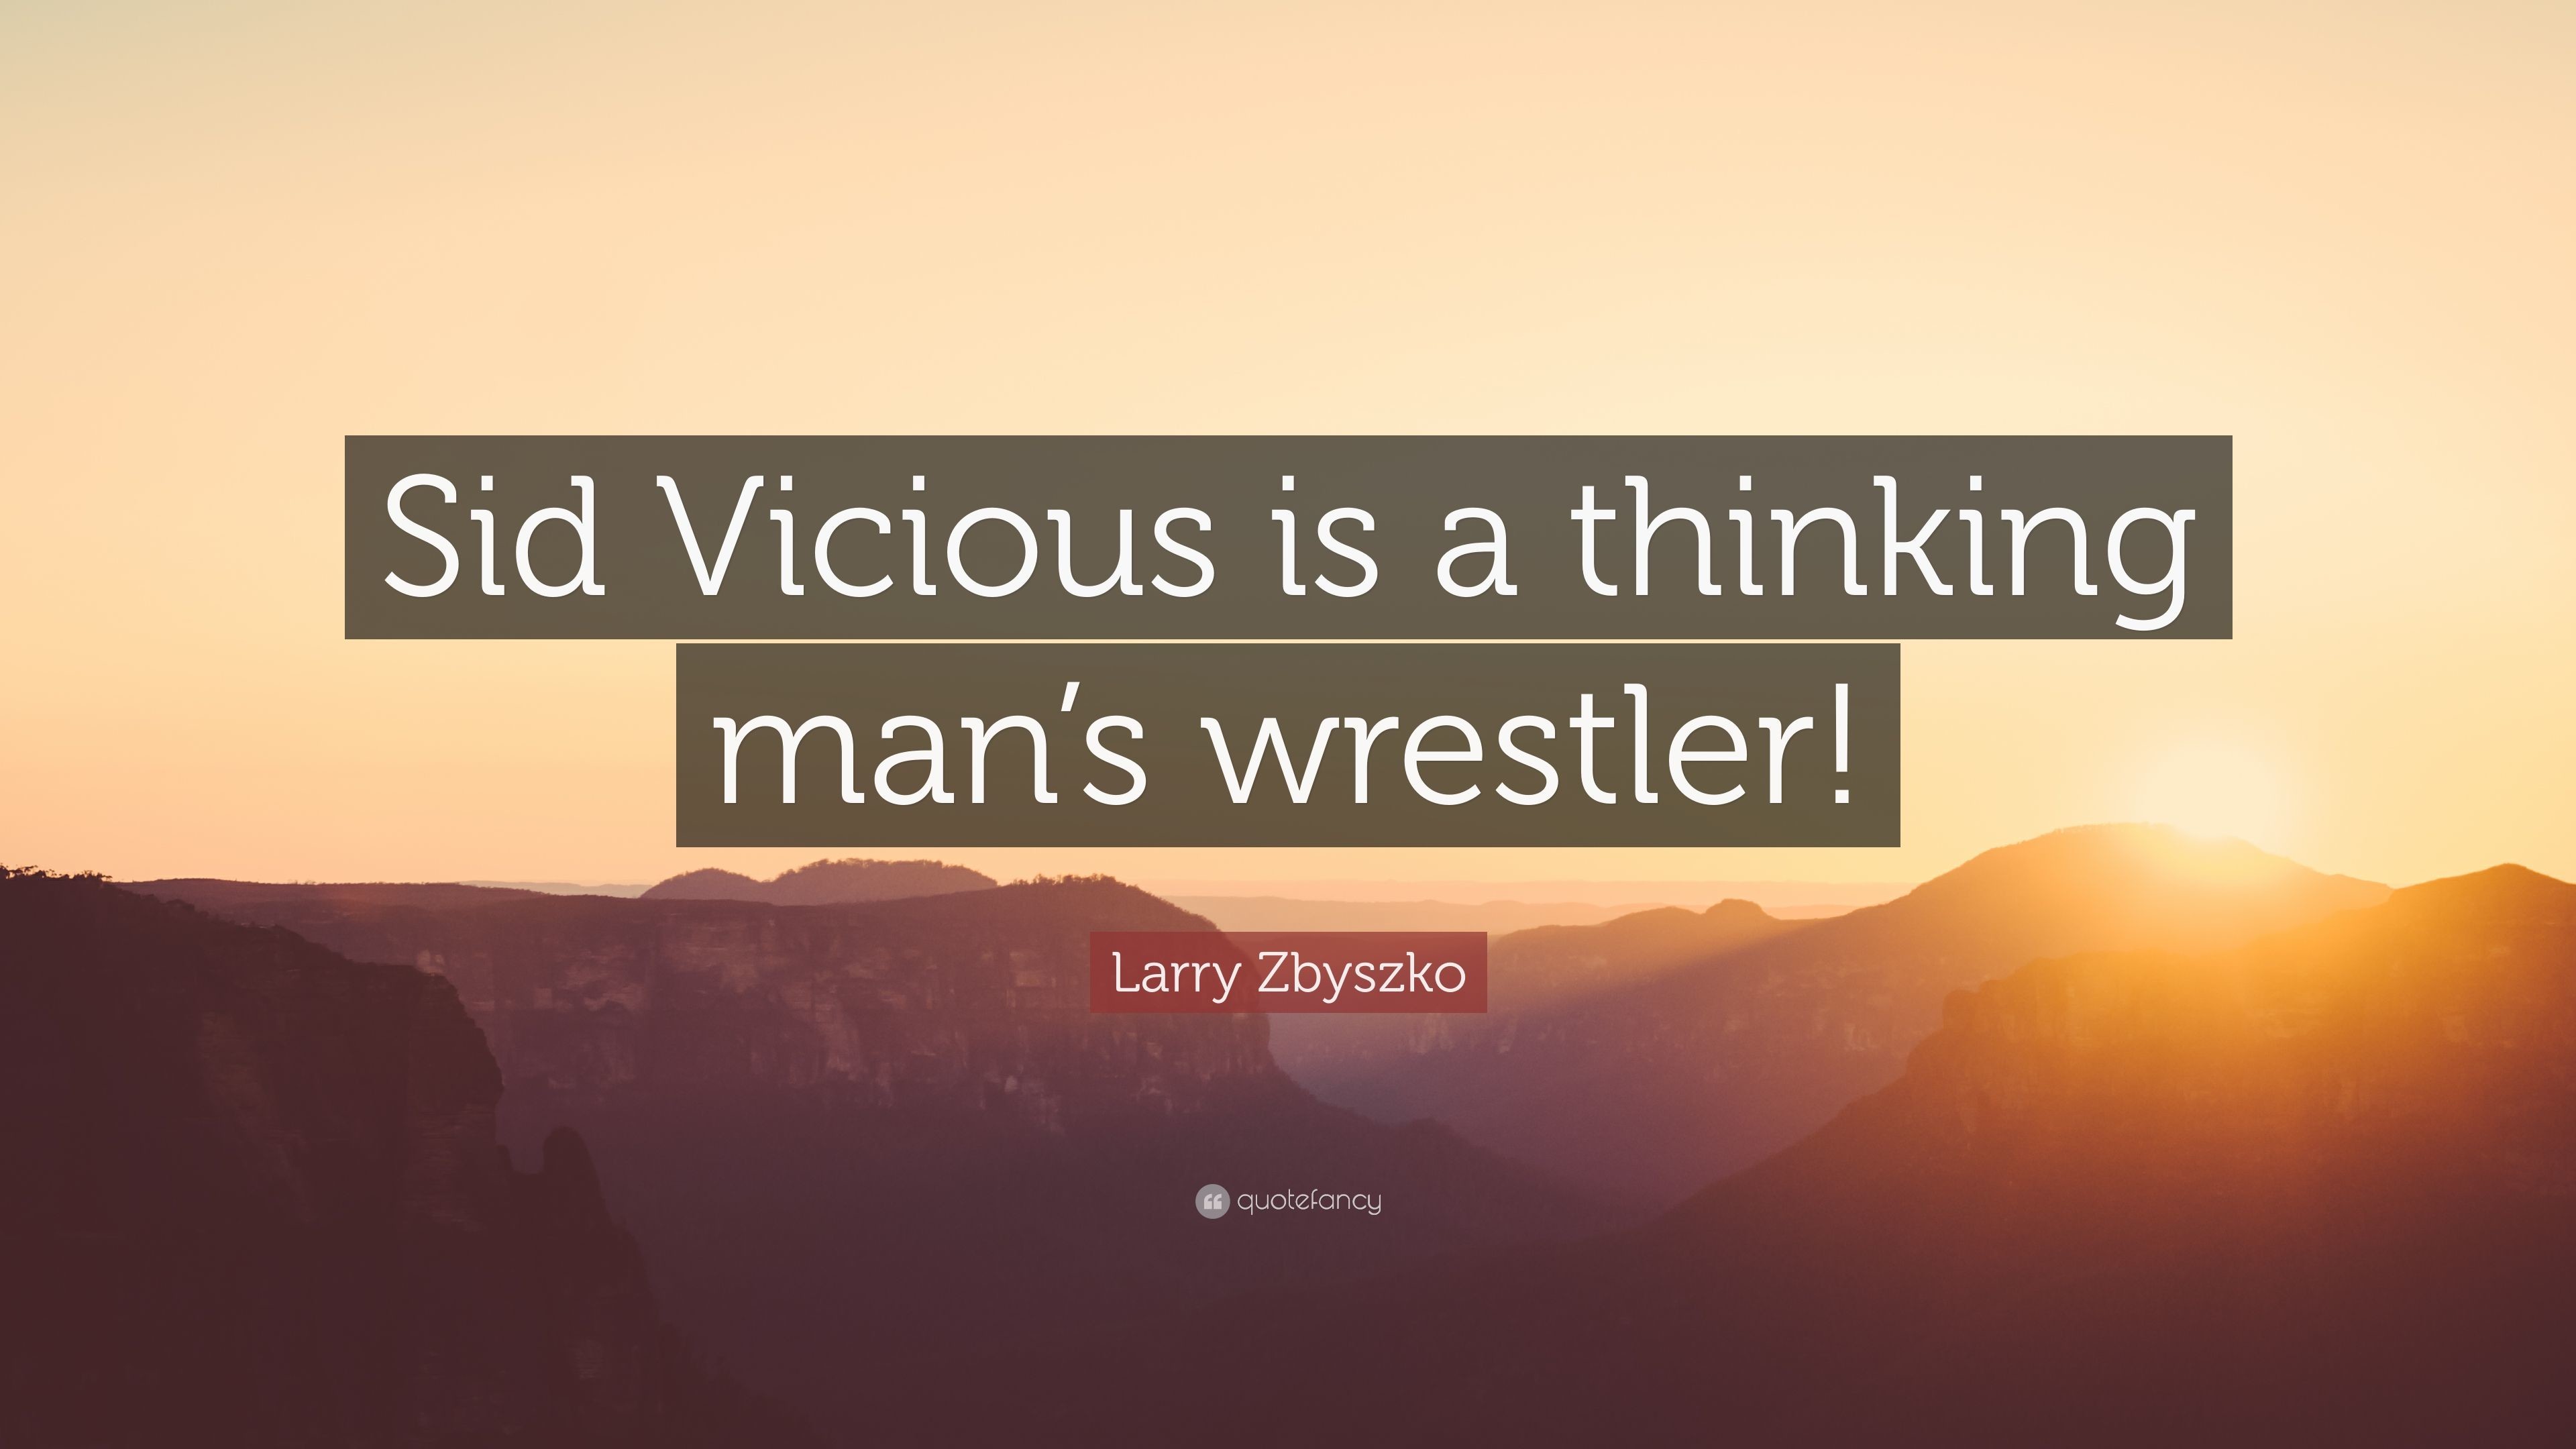 3840x2160 Larry Zbyszko Quote: “Sid Vicious is a thinking man's wrestler!”